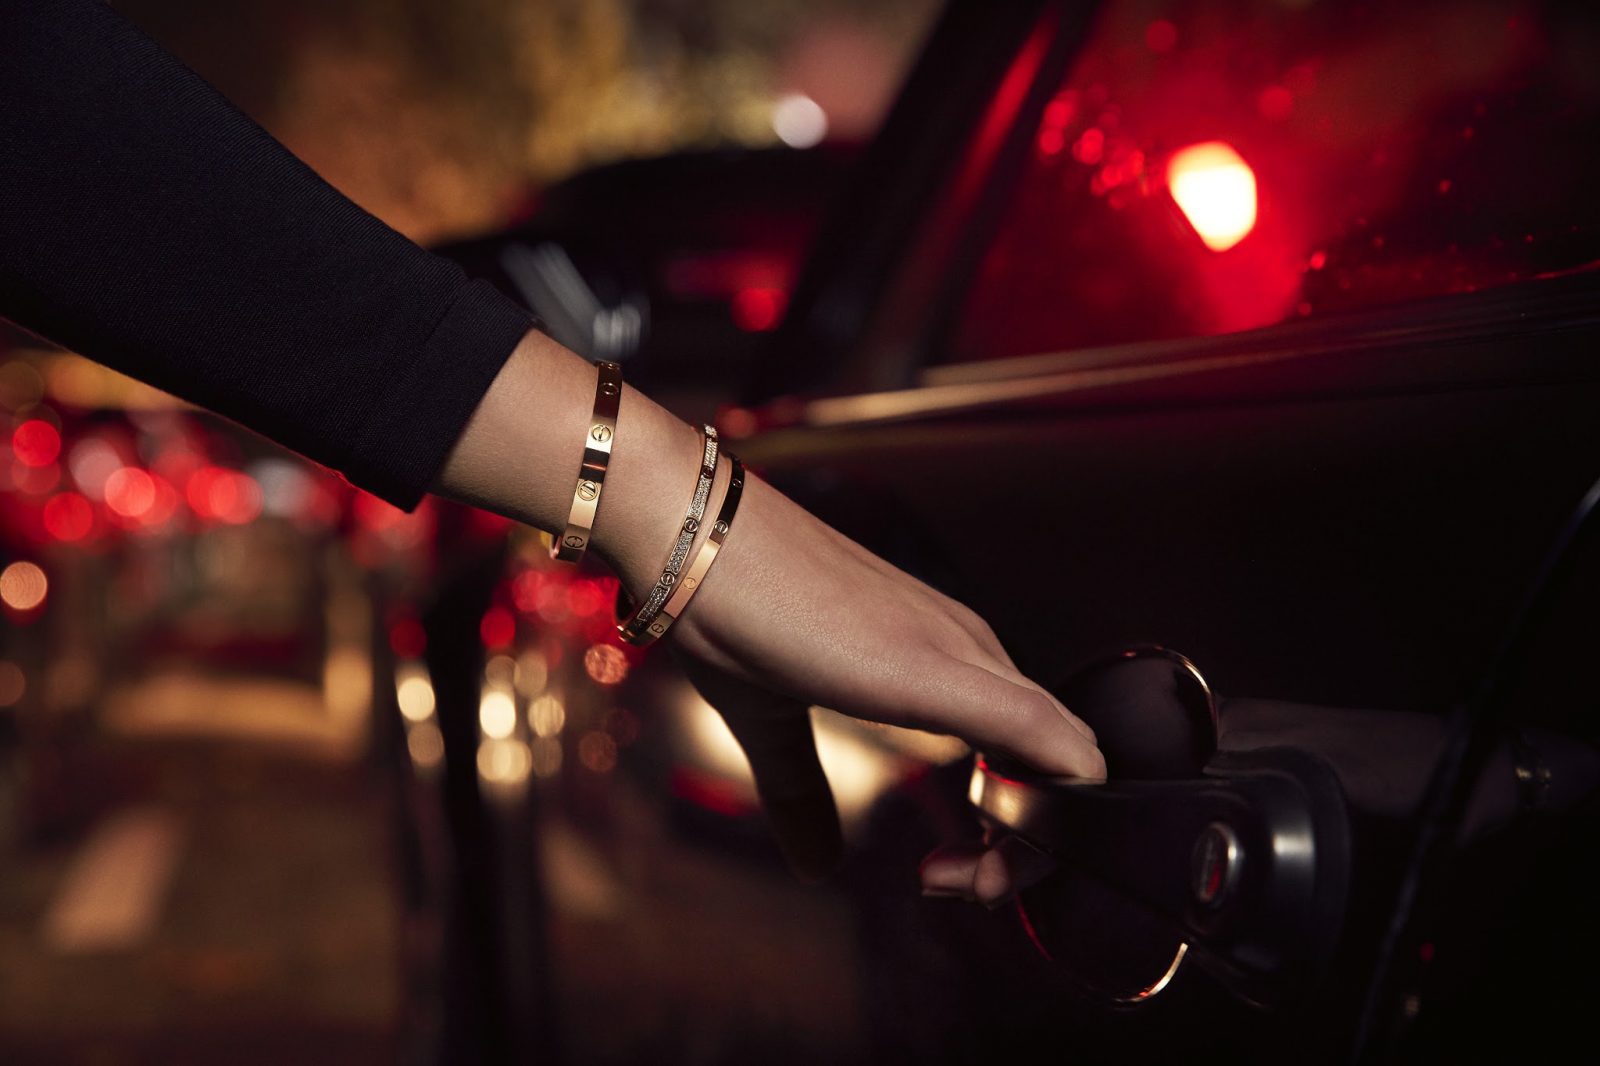 Amazon, Cartier File Suits Over Influencer Scheme to Sell Fake Love Bracelets - The Fashion Law